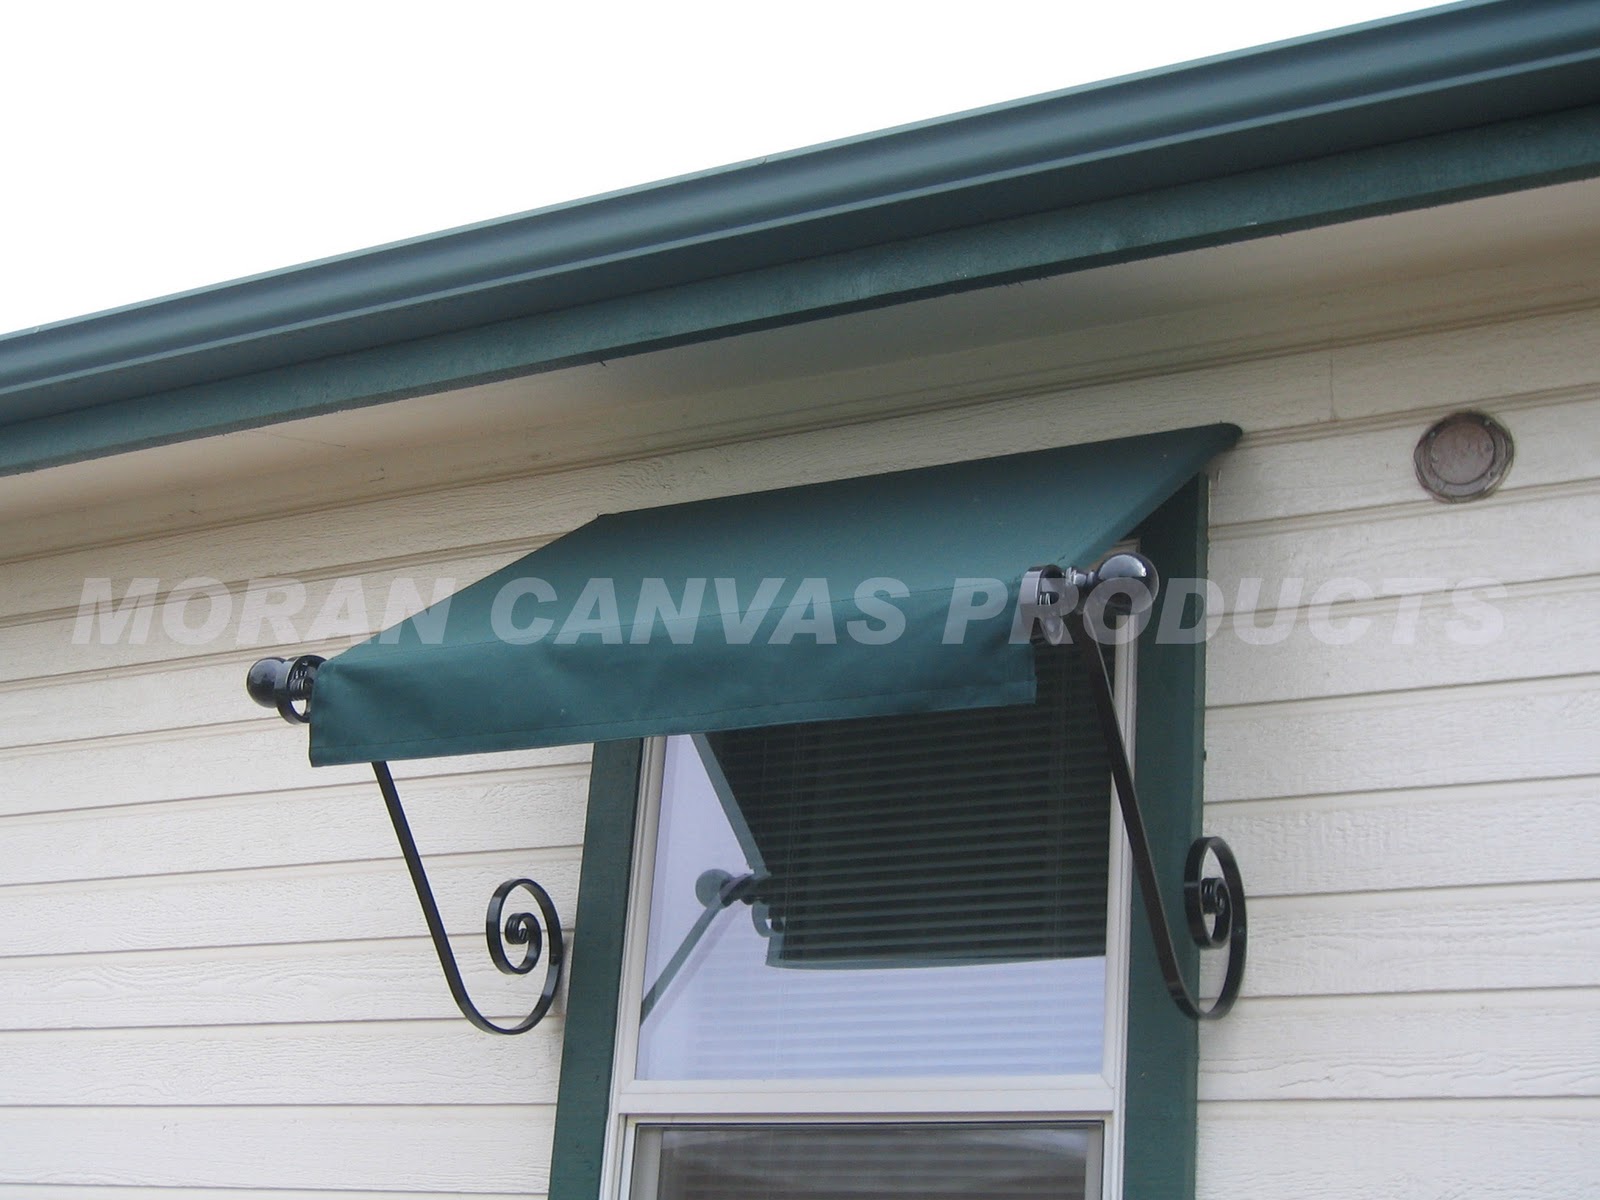 images of front door awnings